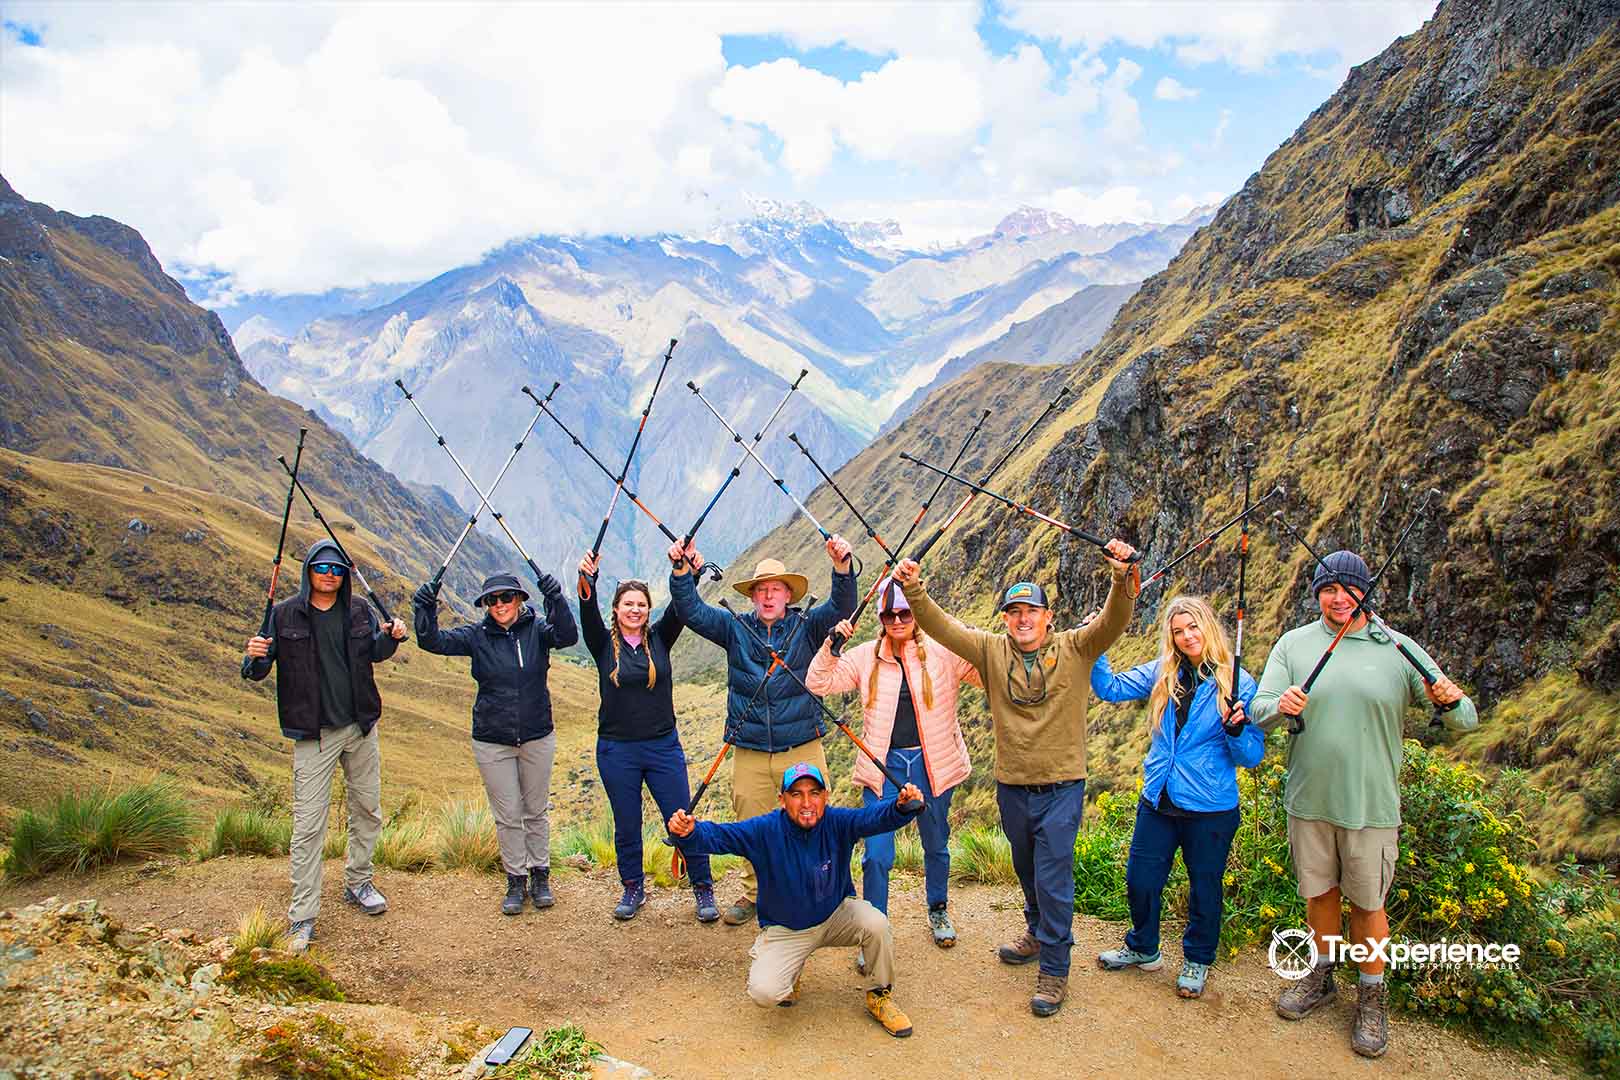 Interaction with other traverlers in Peru | TreXperience